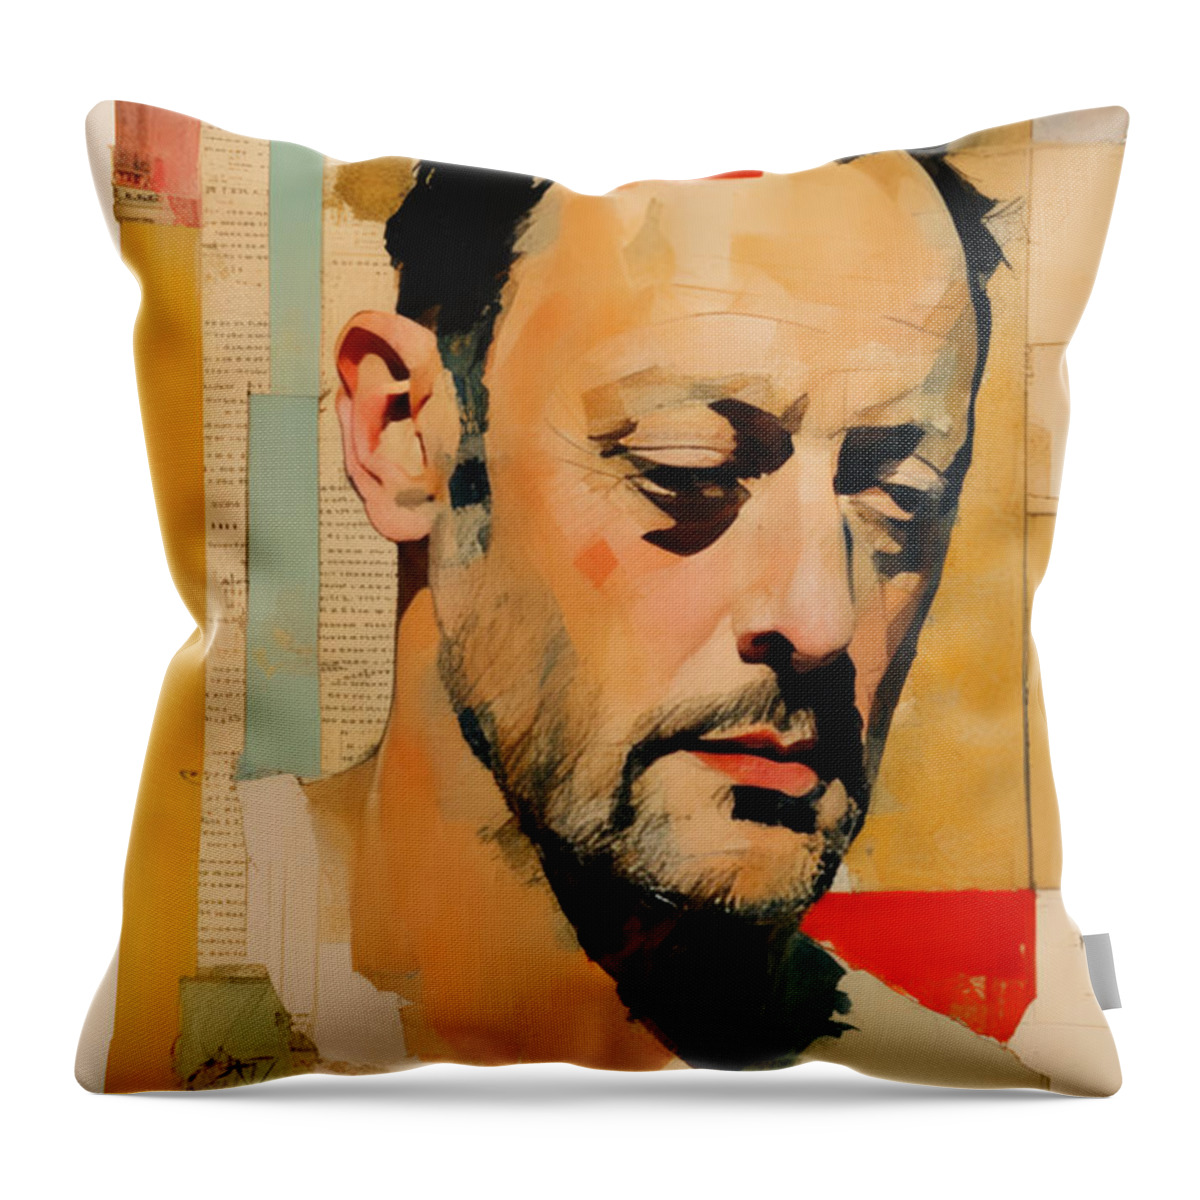 Jean Reno Throw Pillow featuring the painting Jean Reno No.1 by My Head Cinema